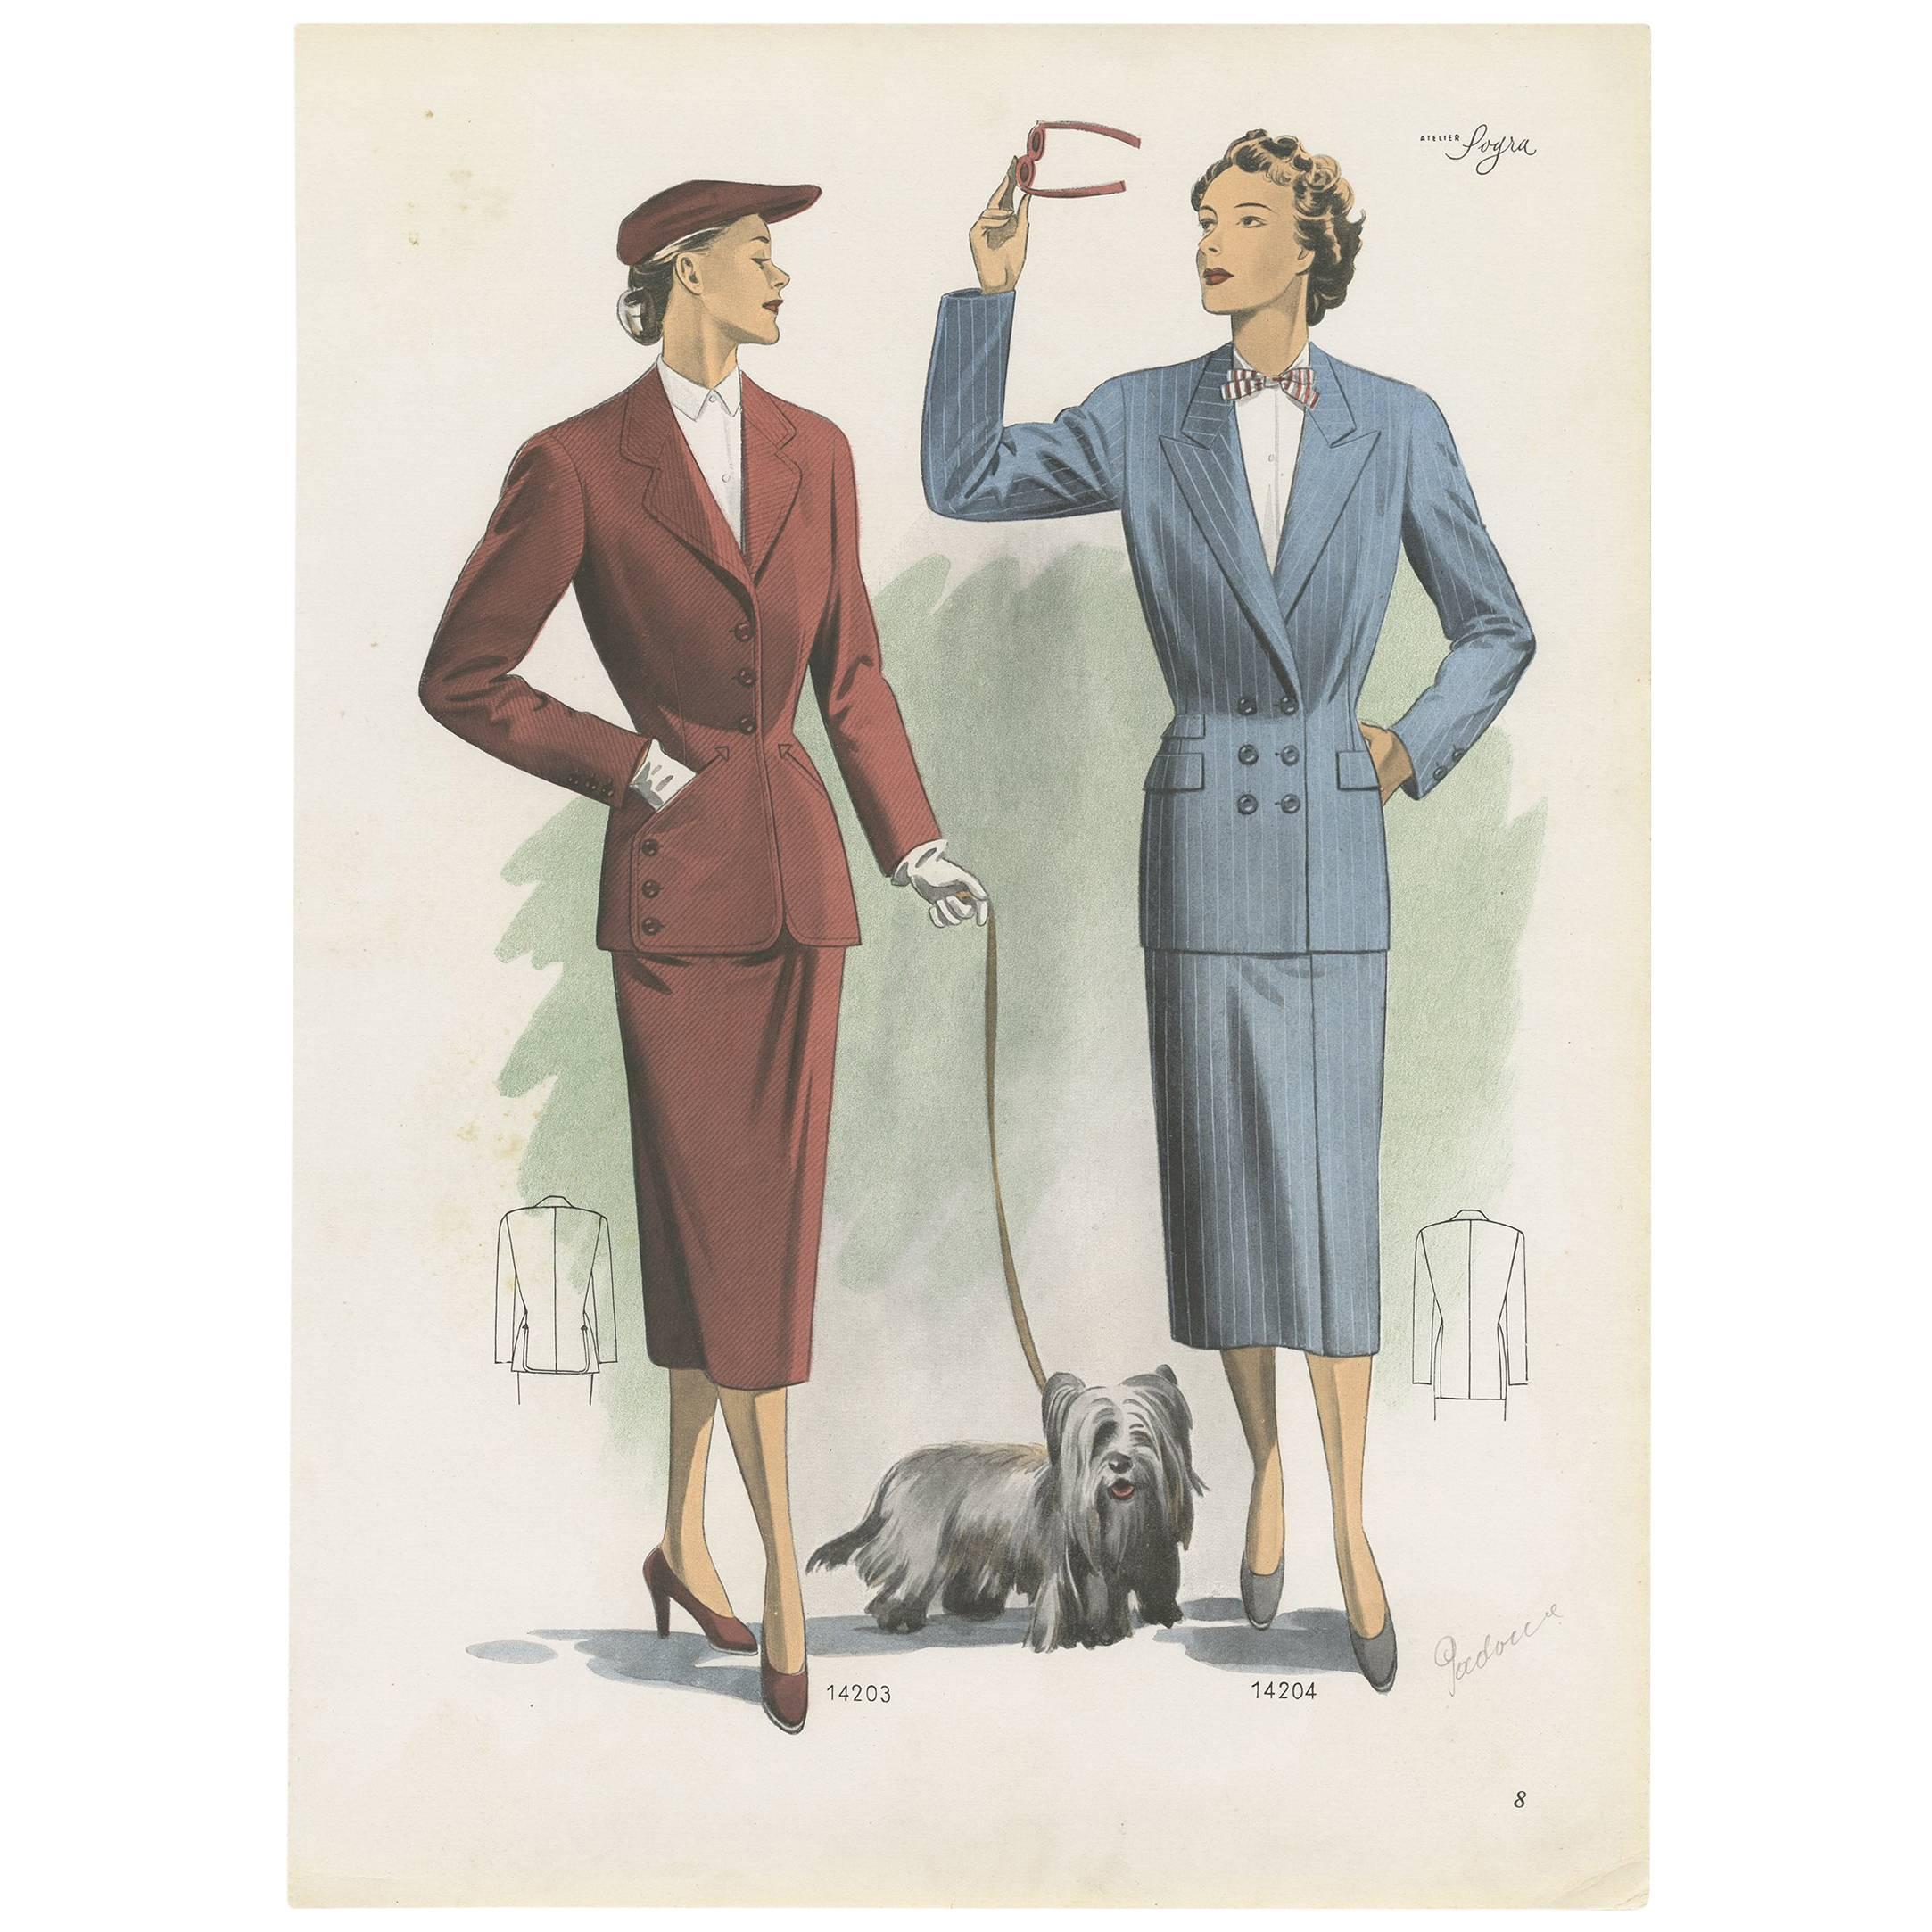 Vintage Fashion Print 'Pl. 14203' Published in Ladies Styles, 1951 For Sale